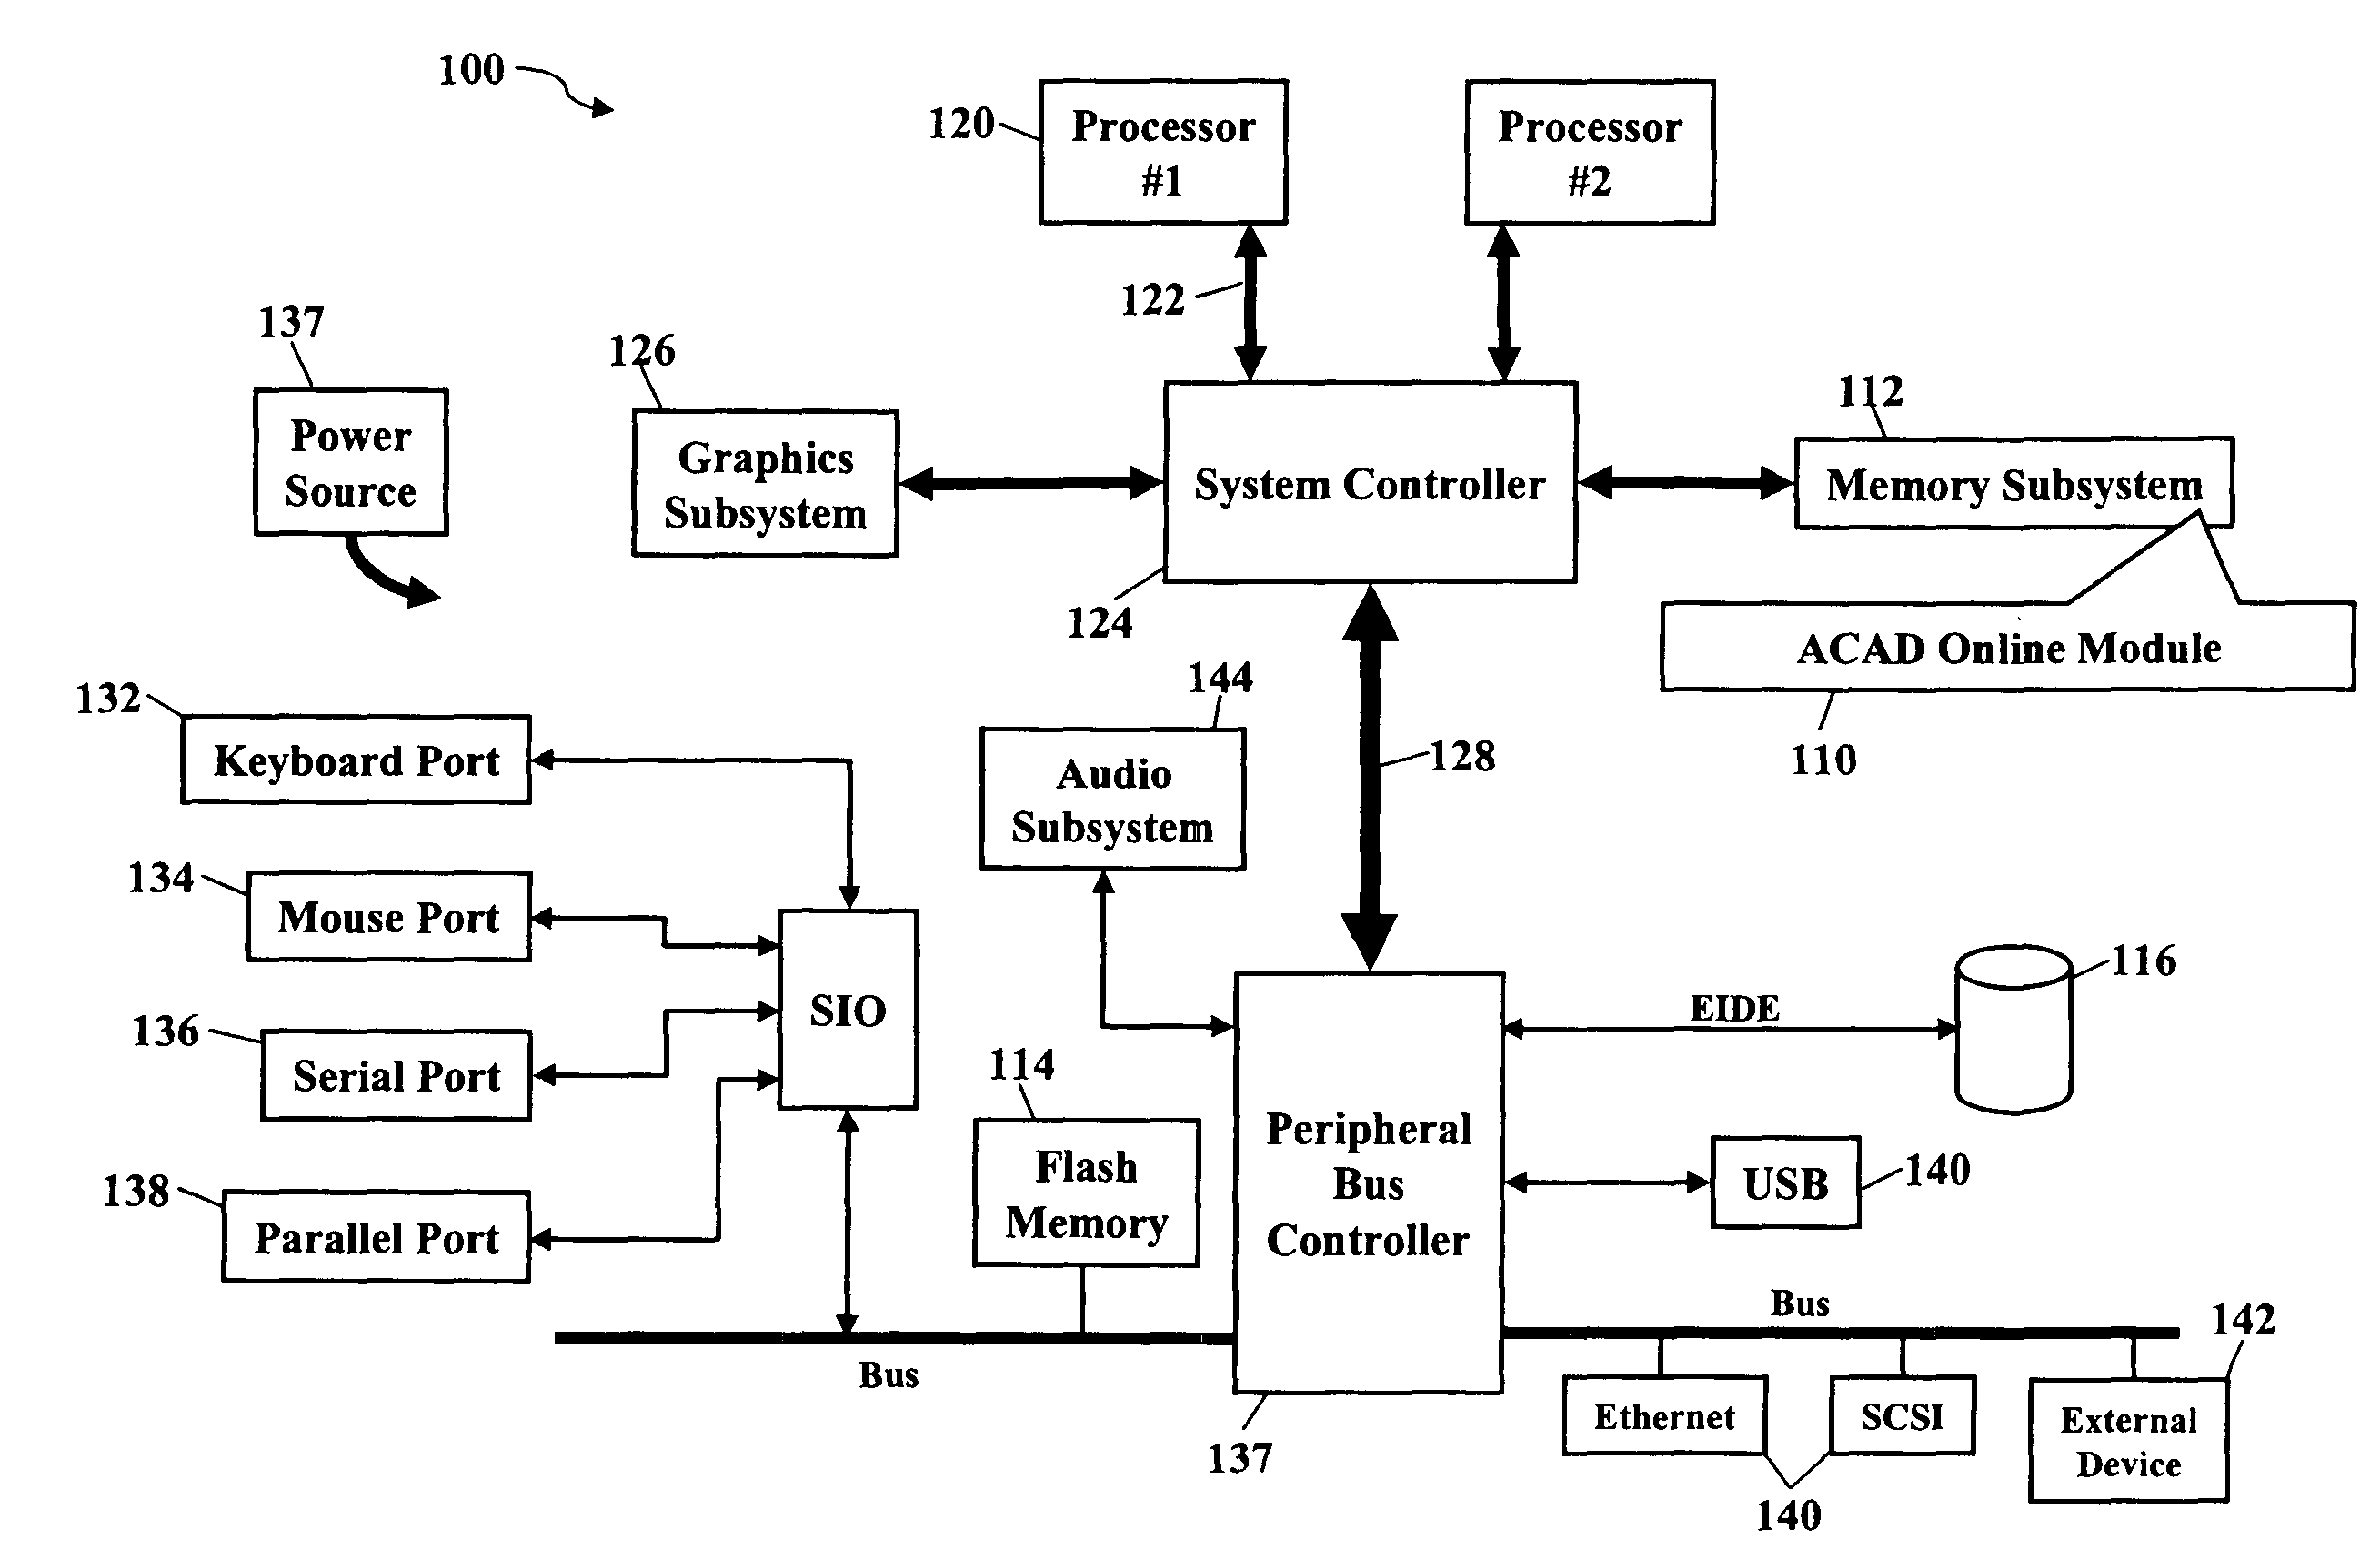 Systems and methods for management and analysis of telecommunication access service